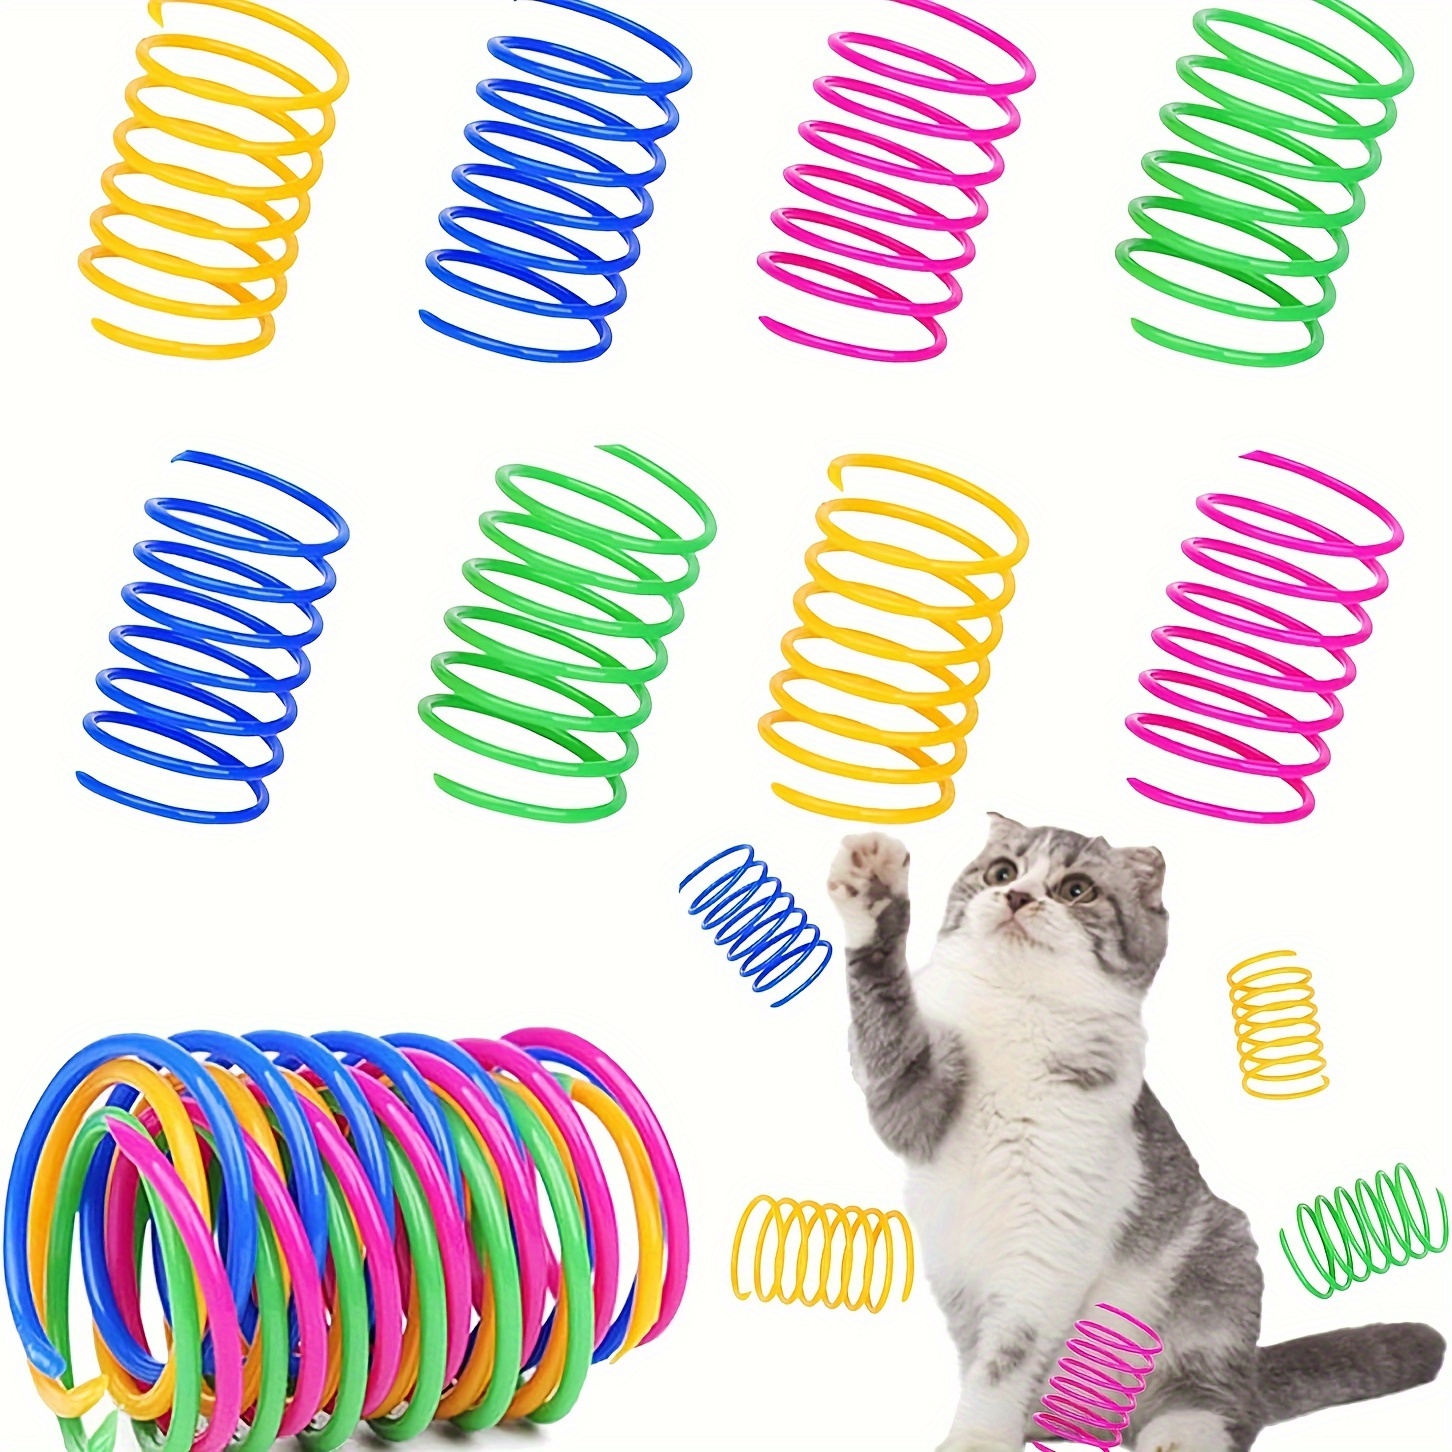 

60 Pack Cat Spring Toys, Multicolor Plastic Coil Spiral Springs For Cats And Kittens, Interactive Bouncing Toy For Batting, Biting, Hunting, And Active Healthy Play - No Batteries Required